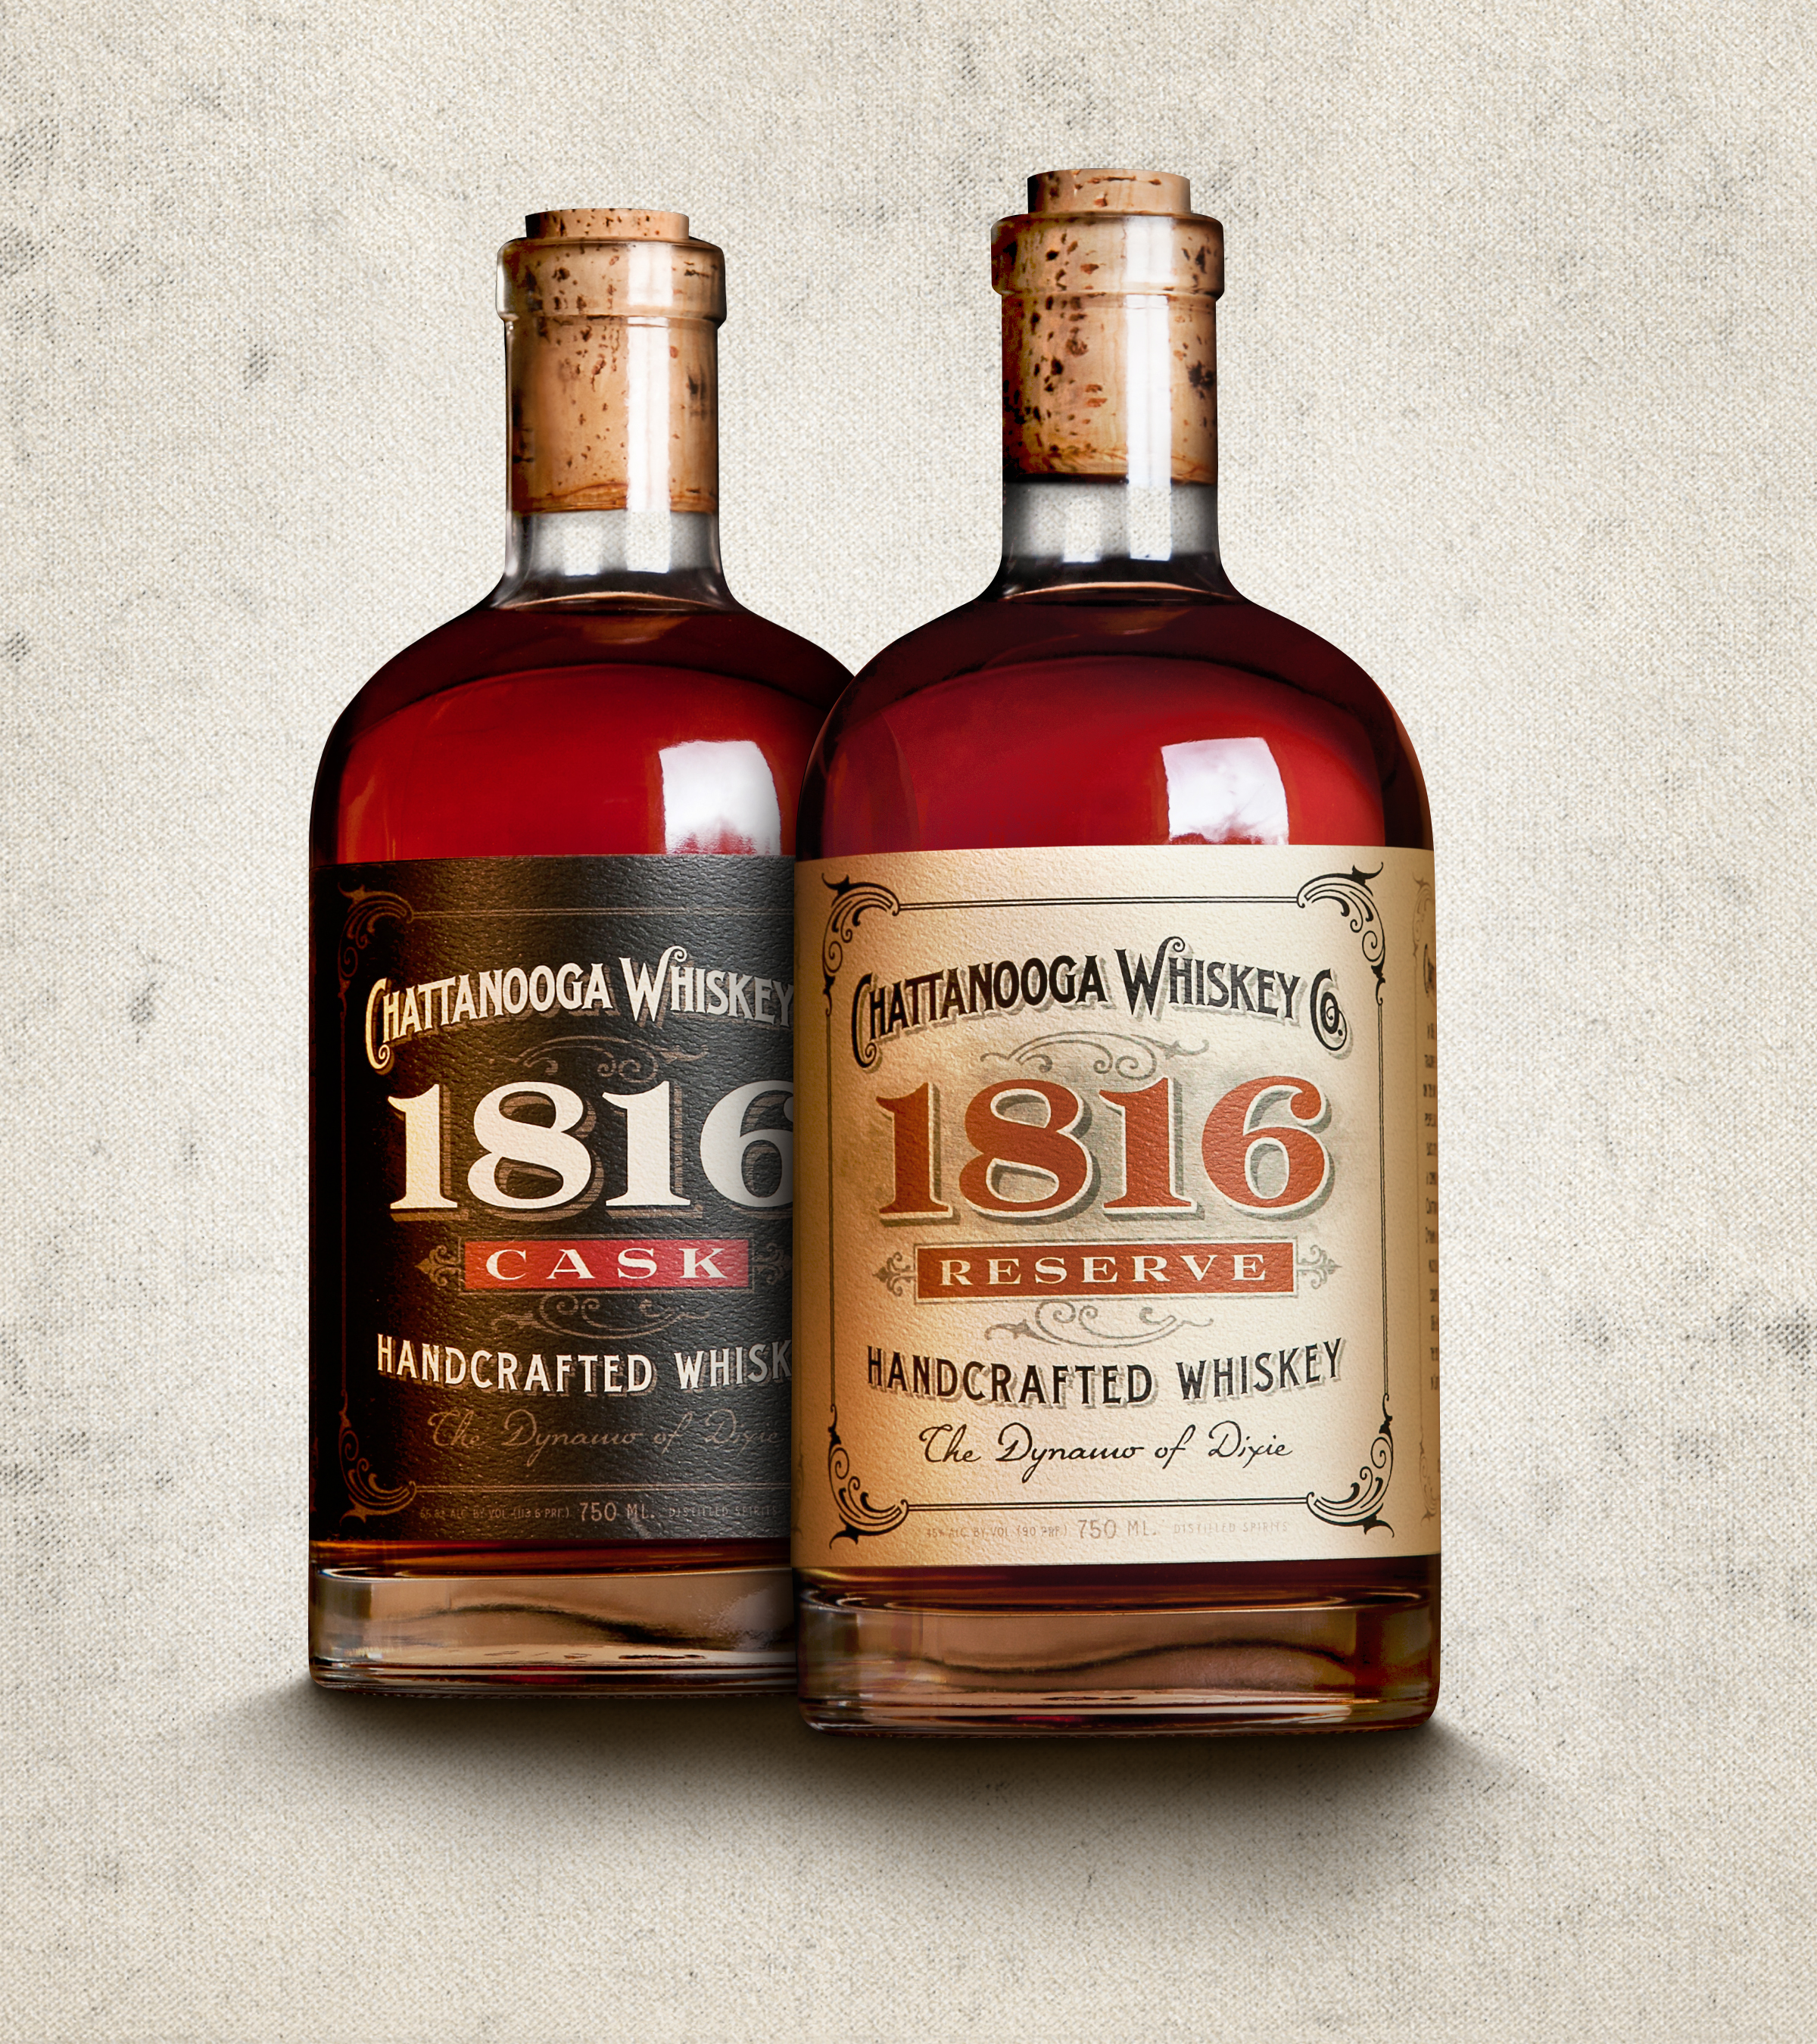 Chattanooga Whiskey Co. 1816 Reserve Handcrafted Whiskey